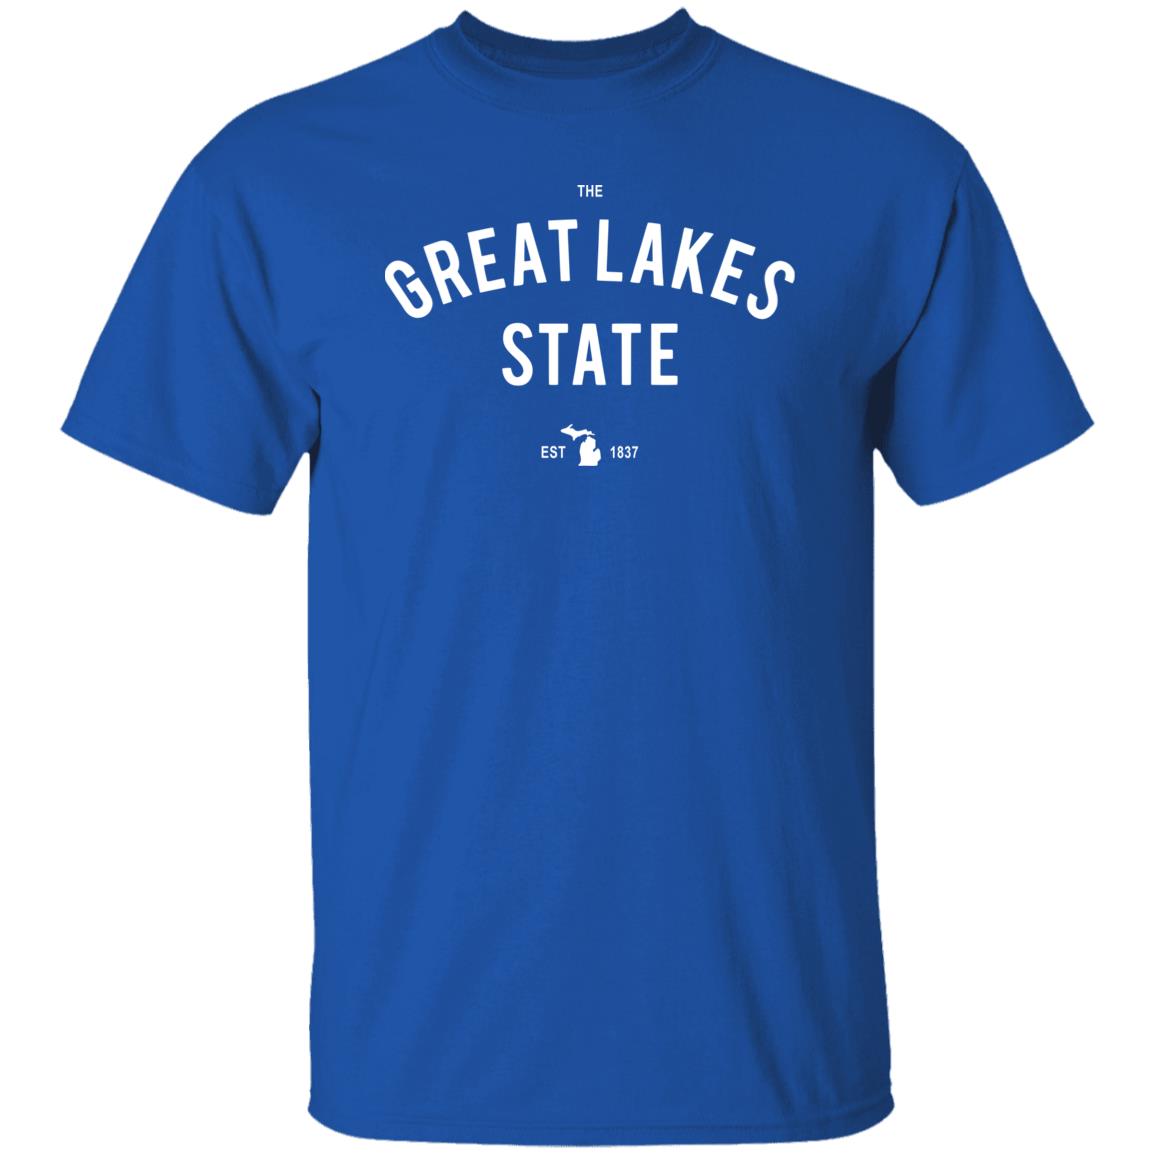 The Great Lakes State - White G500 5.3 oz. T-Shirt